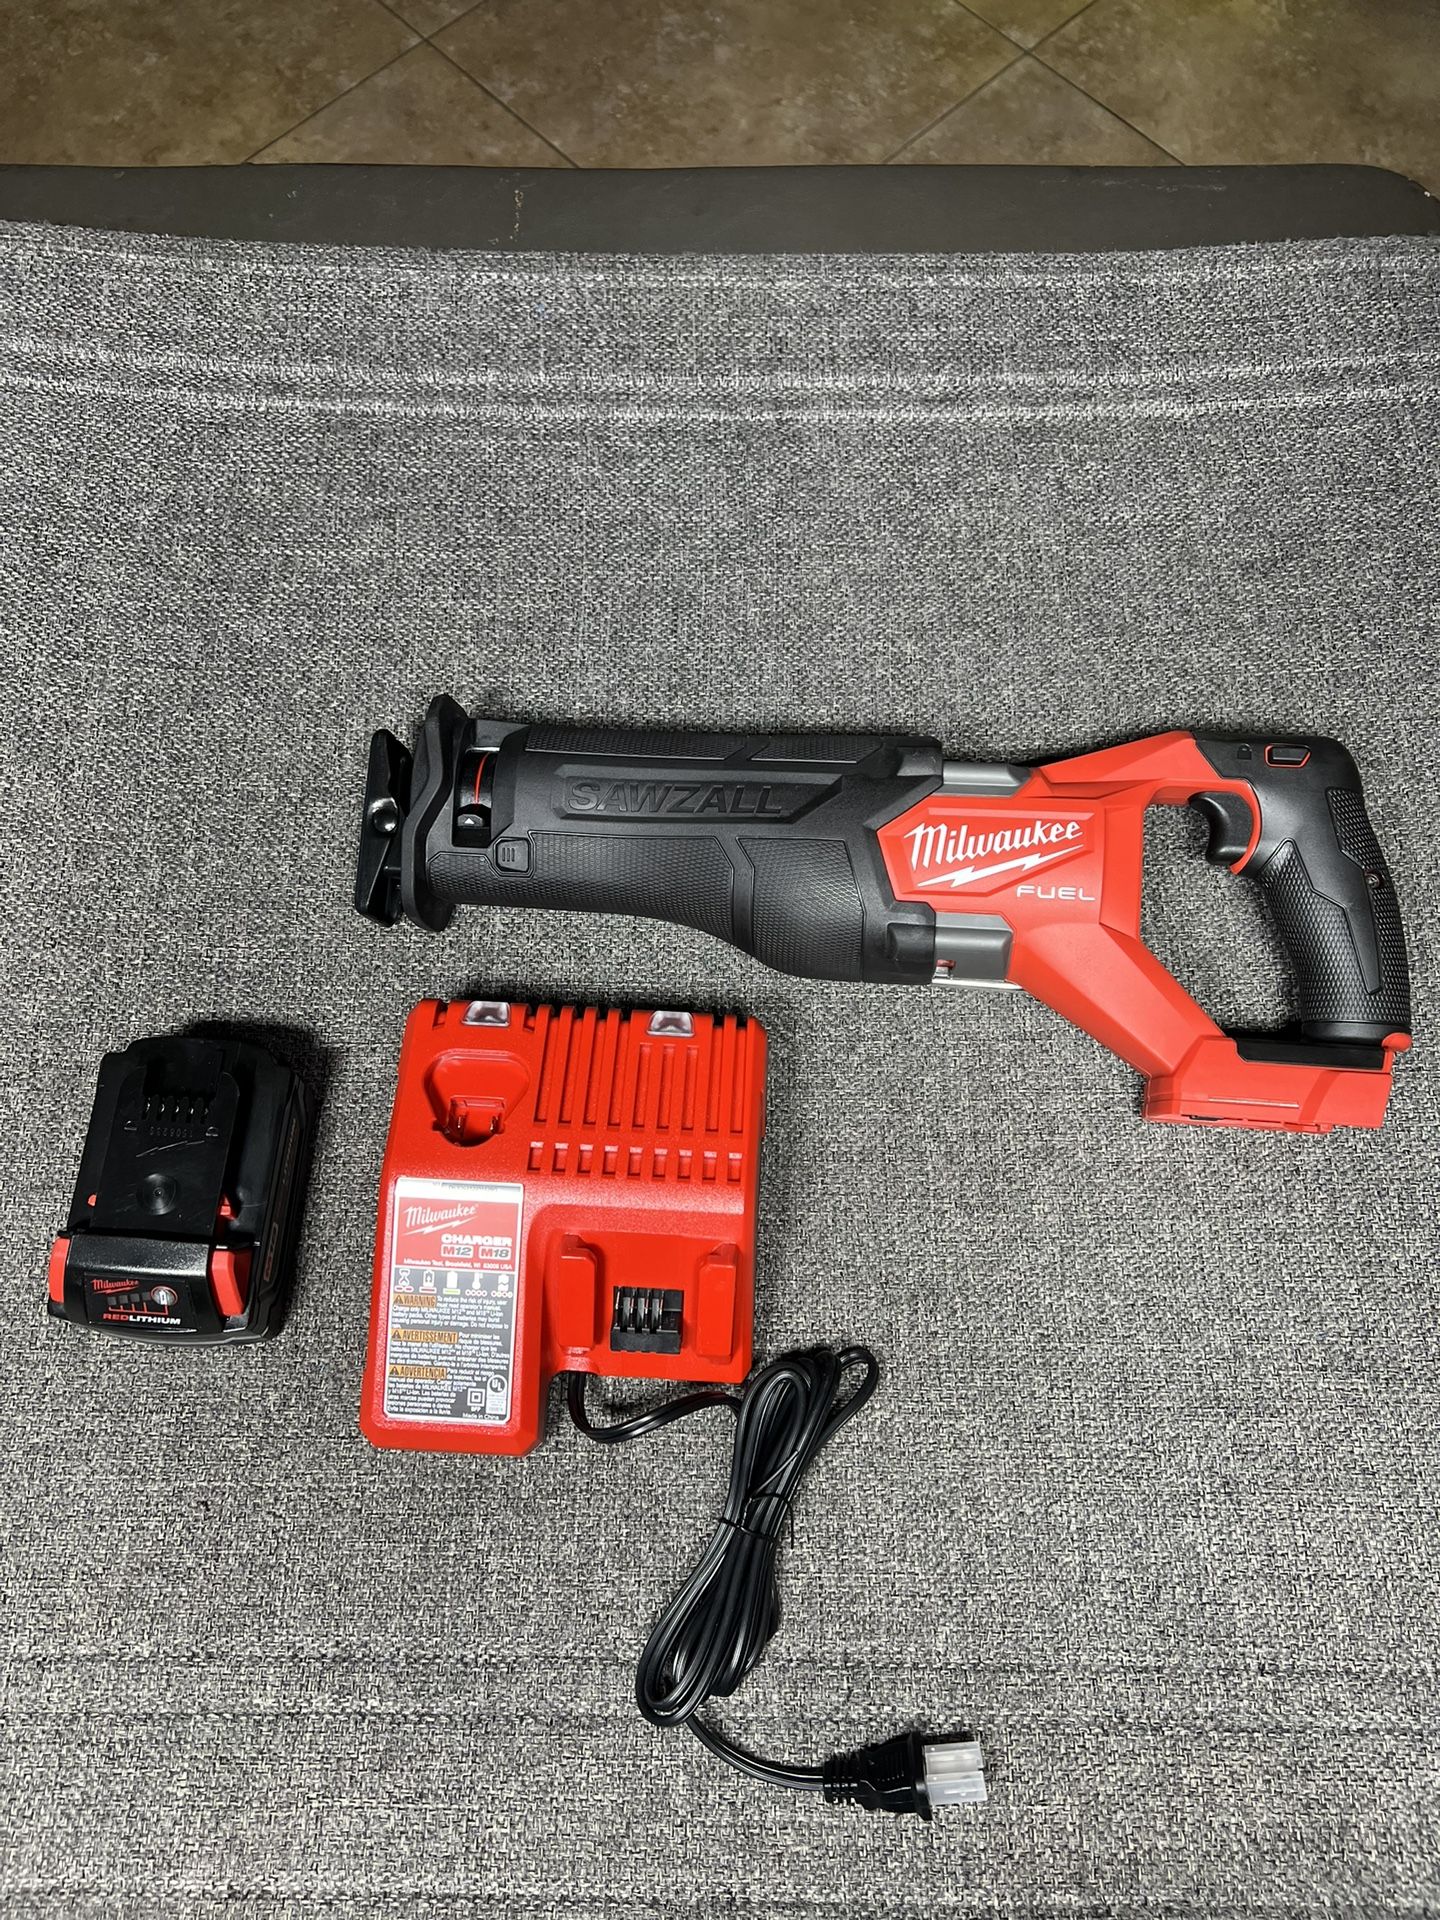 Milwaukee M18 Gen 2 SawZall Reciprocating Saw With 5.0 Ah Battery And Charger 